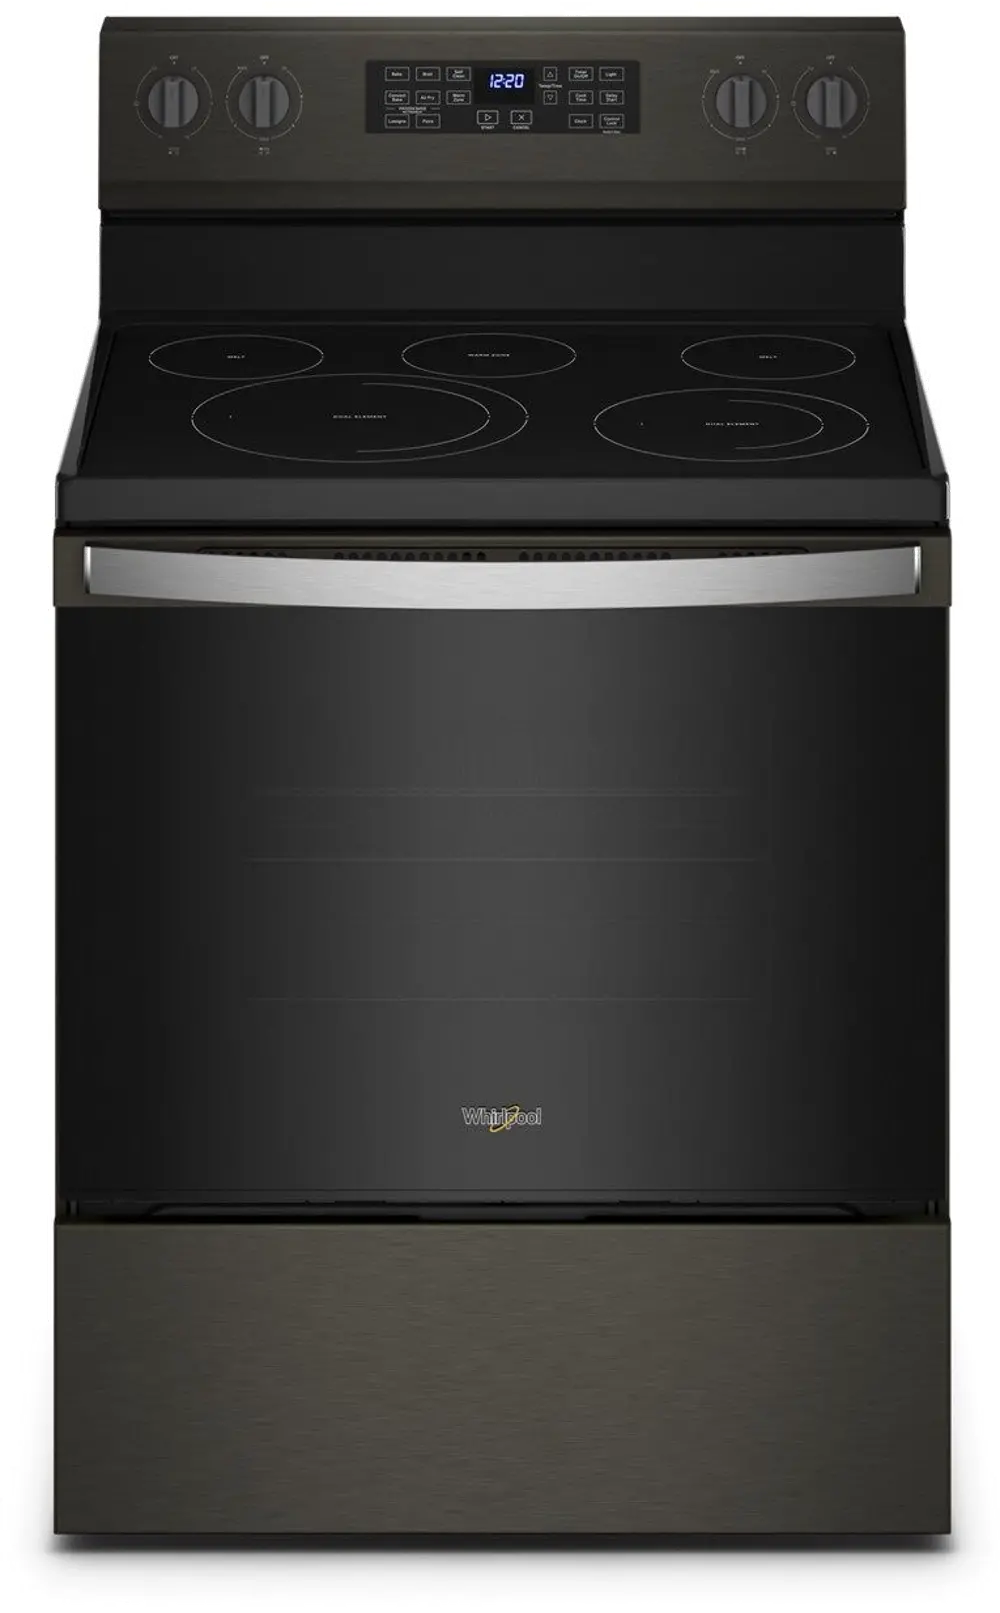 WFE550S0LV Whirlpool 5.3 cu ft Electric Range - Black Stainless Steel-1